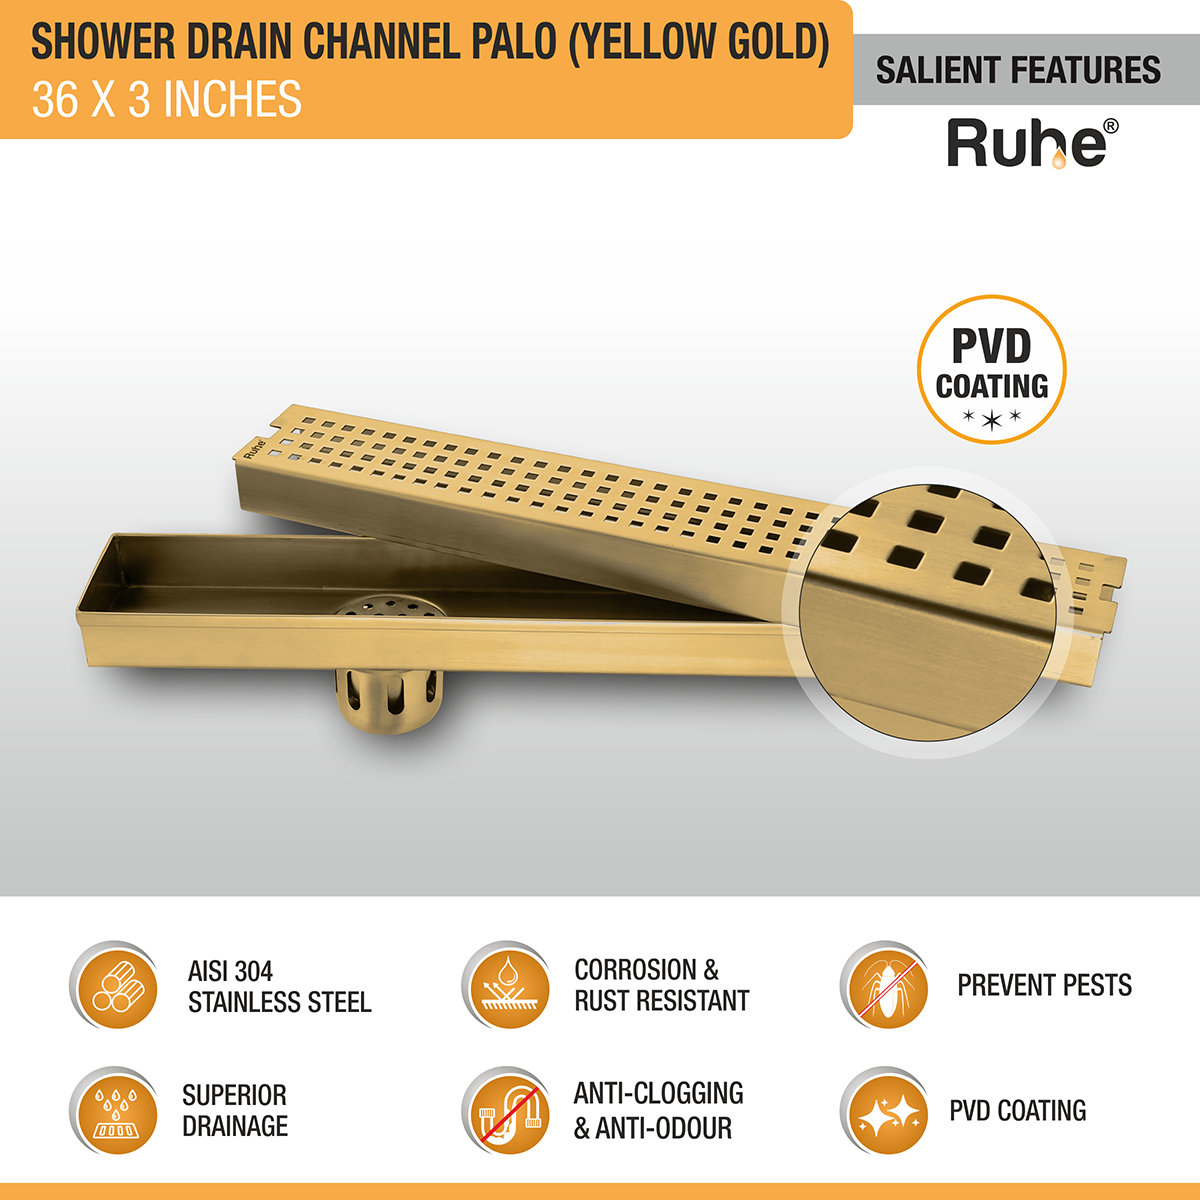 Palo Shower Drain Channel (36 x 3 Inches) YELLOW GOLD features